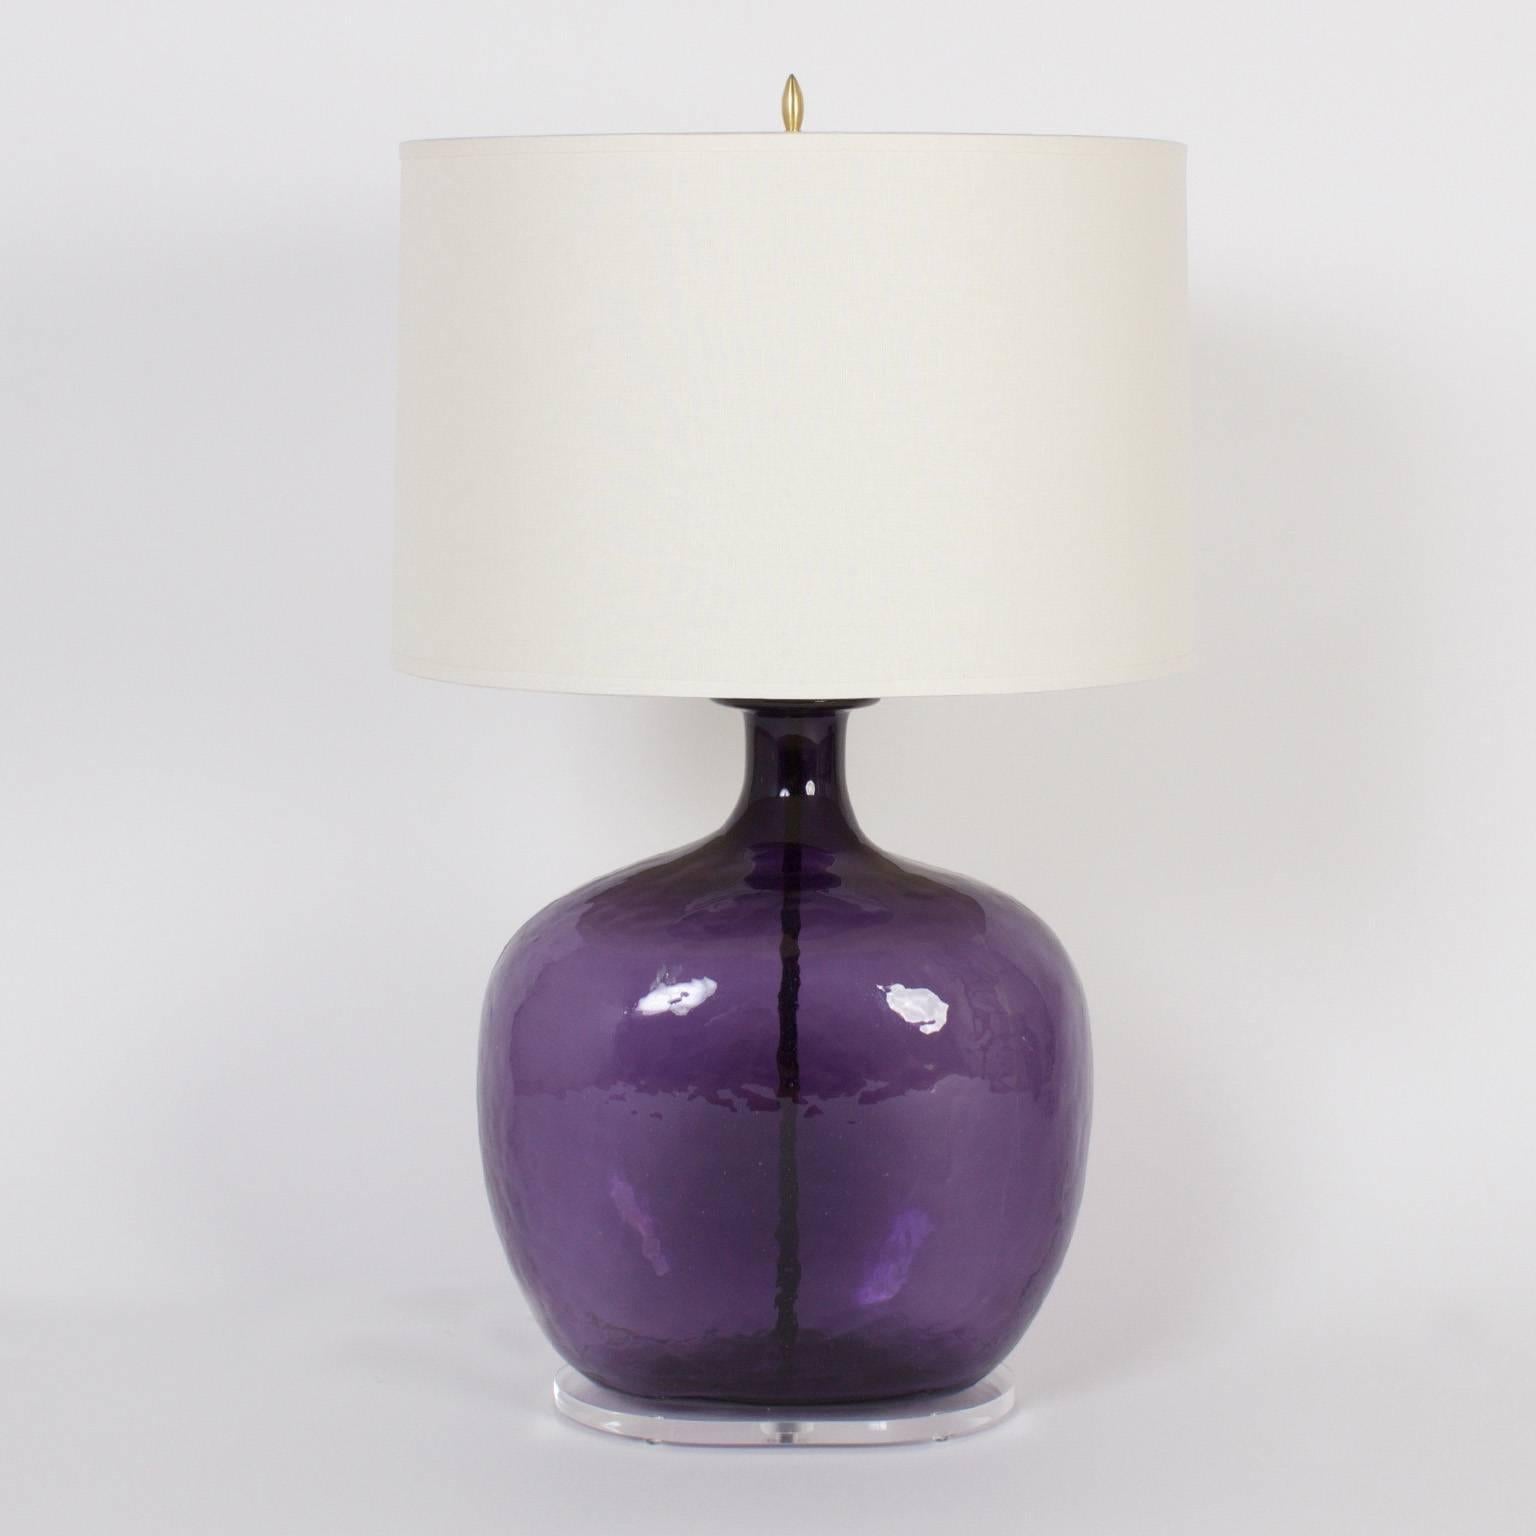 Exclusive pair of table lamps made from bulbous purple glass jars that where begging to be turned into lamps. Finished with a custom Lucite base.

 